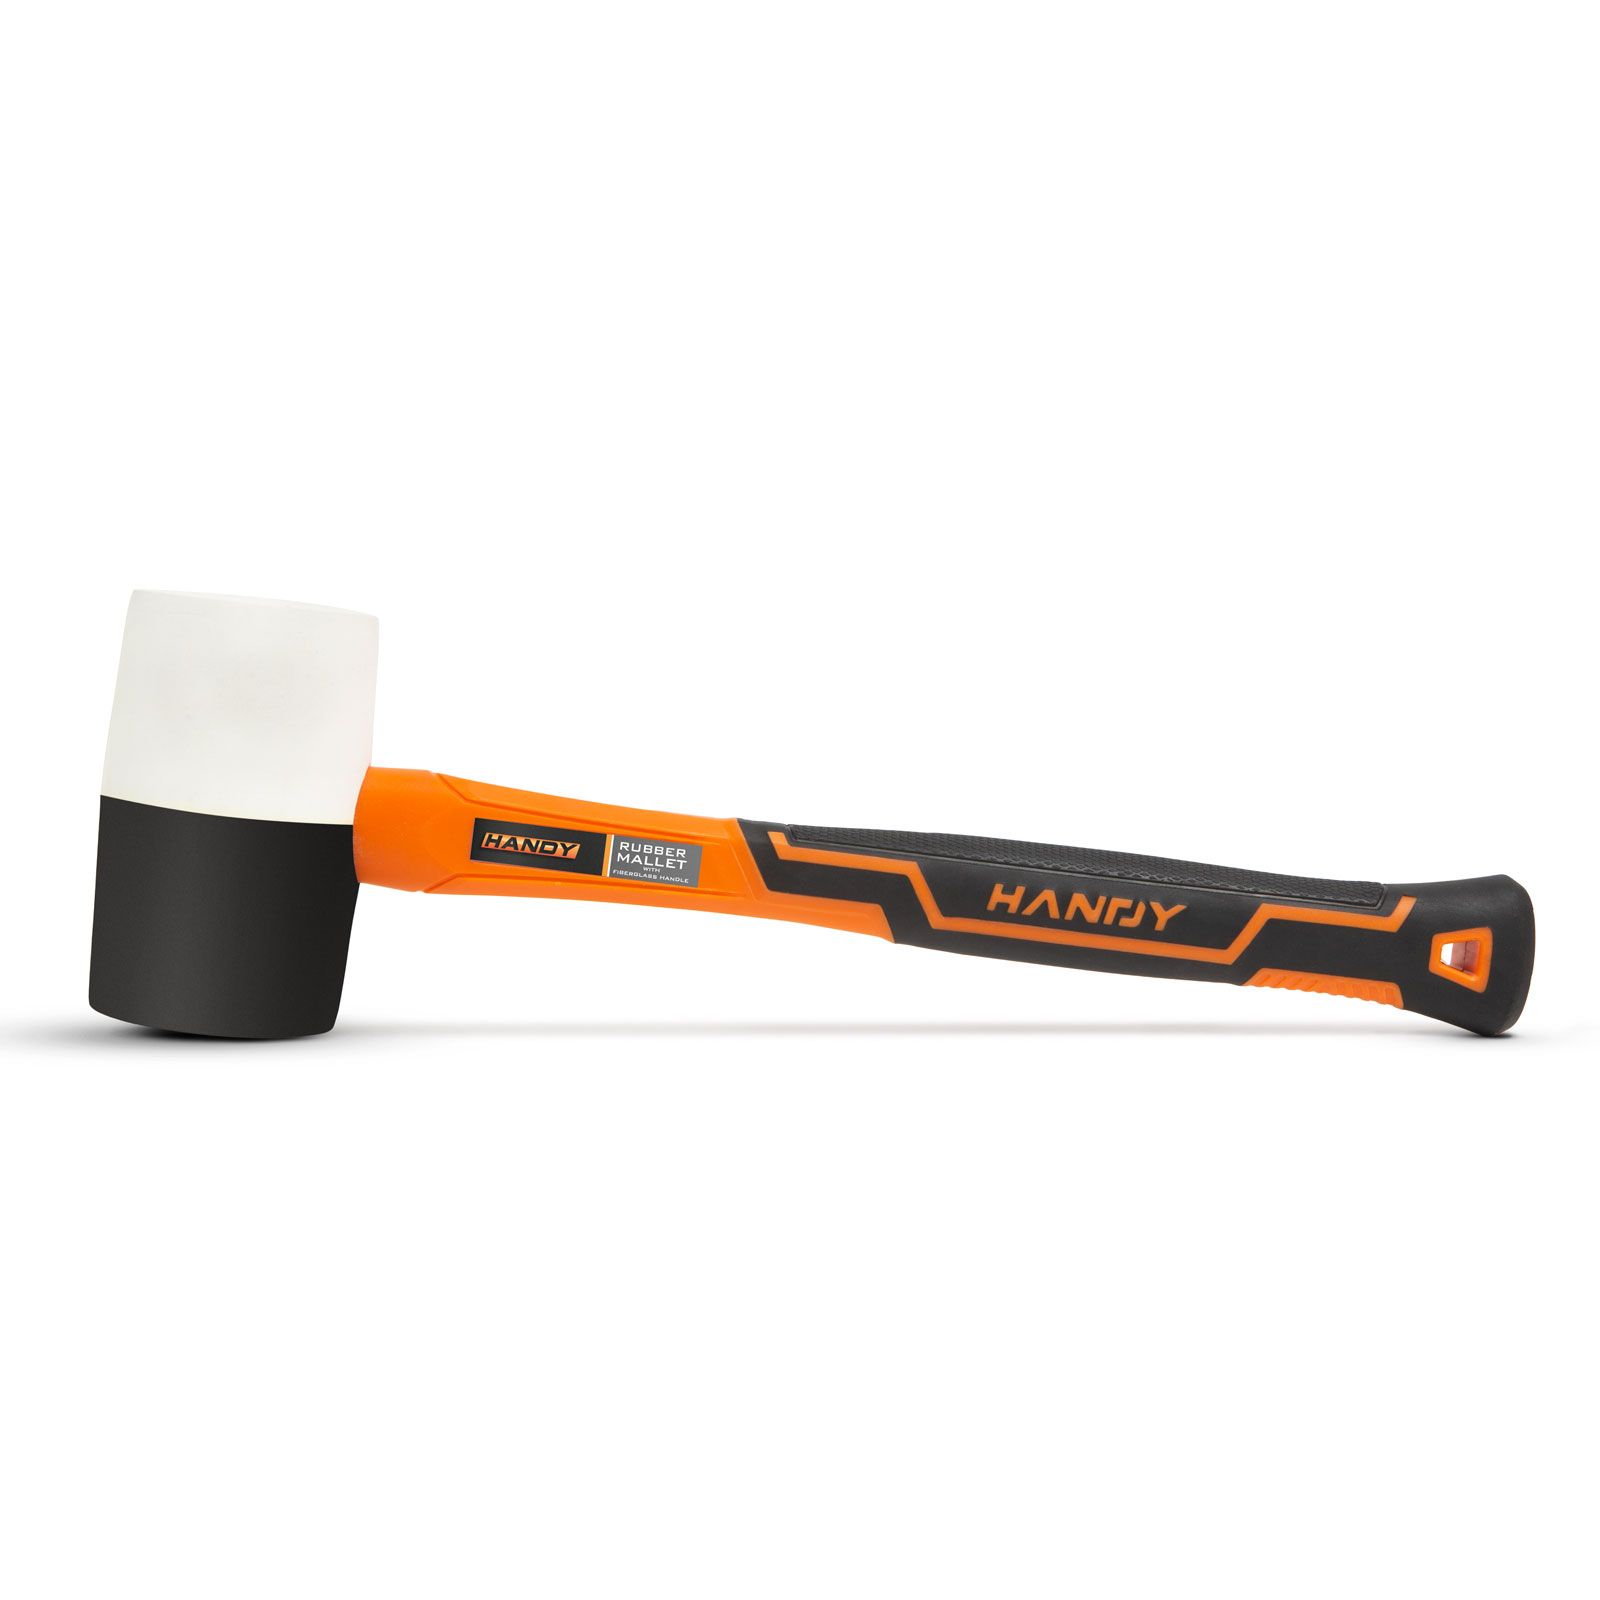 Rubber mallet with fiberglass handle - 450 g thumb